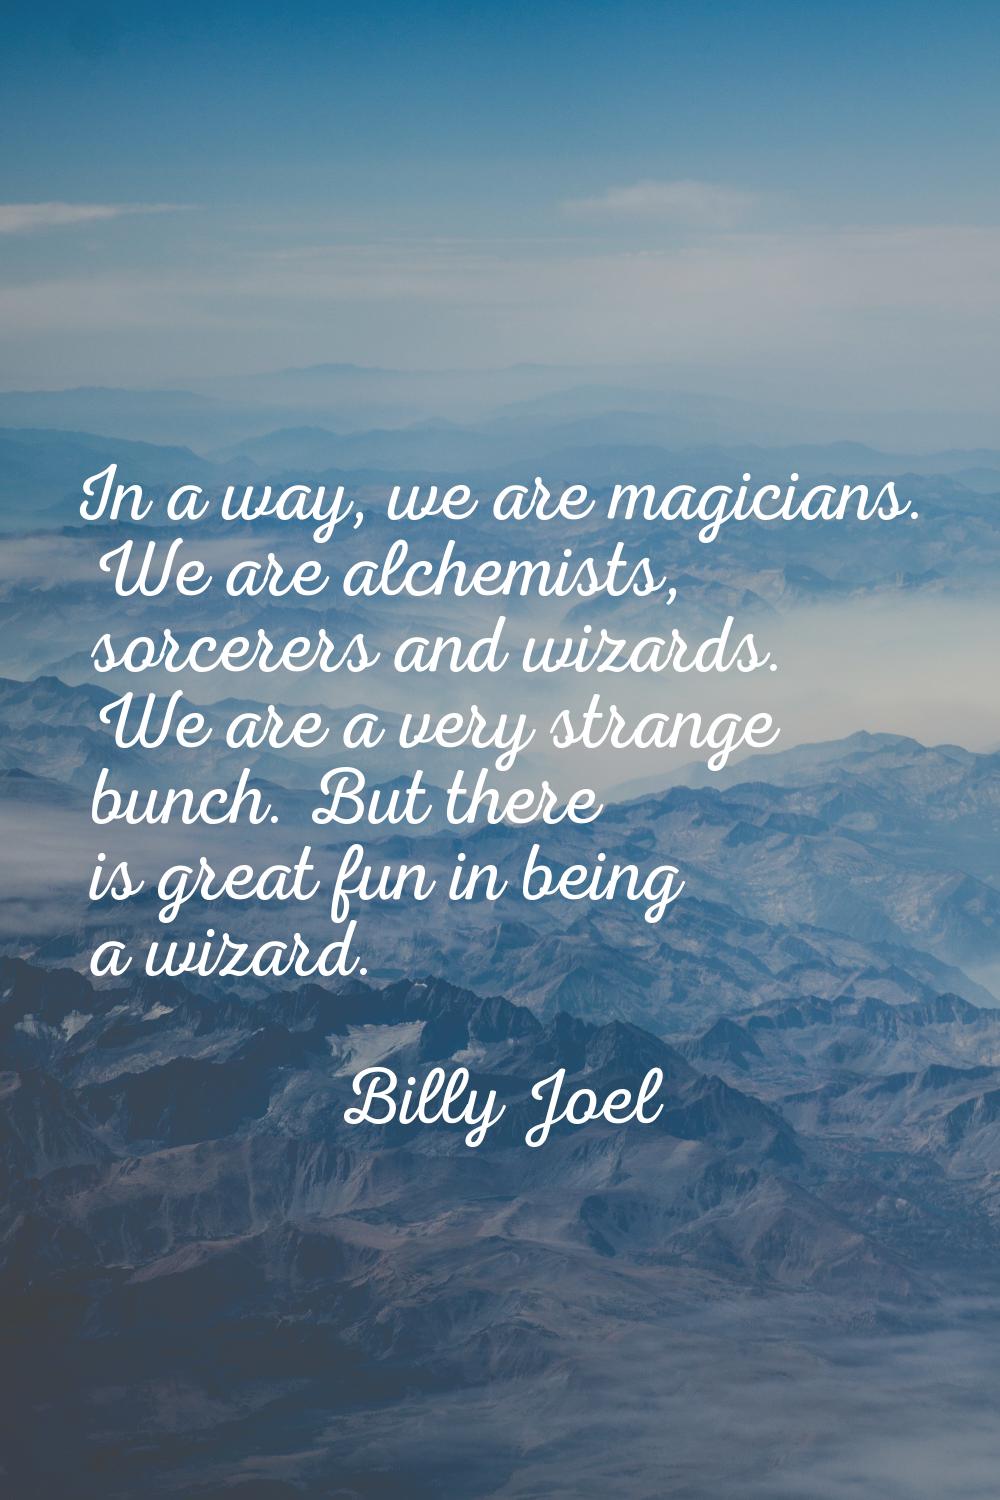 In a way, we are magicians. We are alchemists, sorcerers and wizards. We are a very strange bunch. 